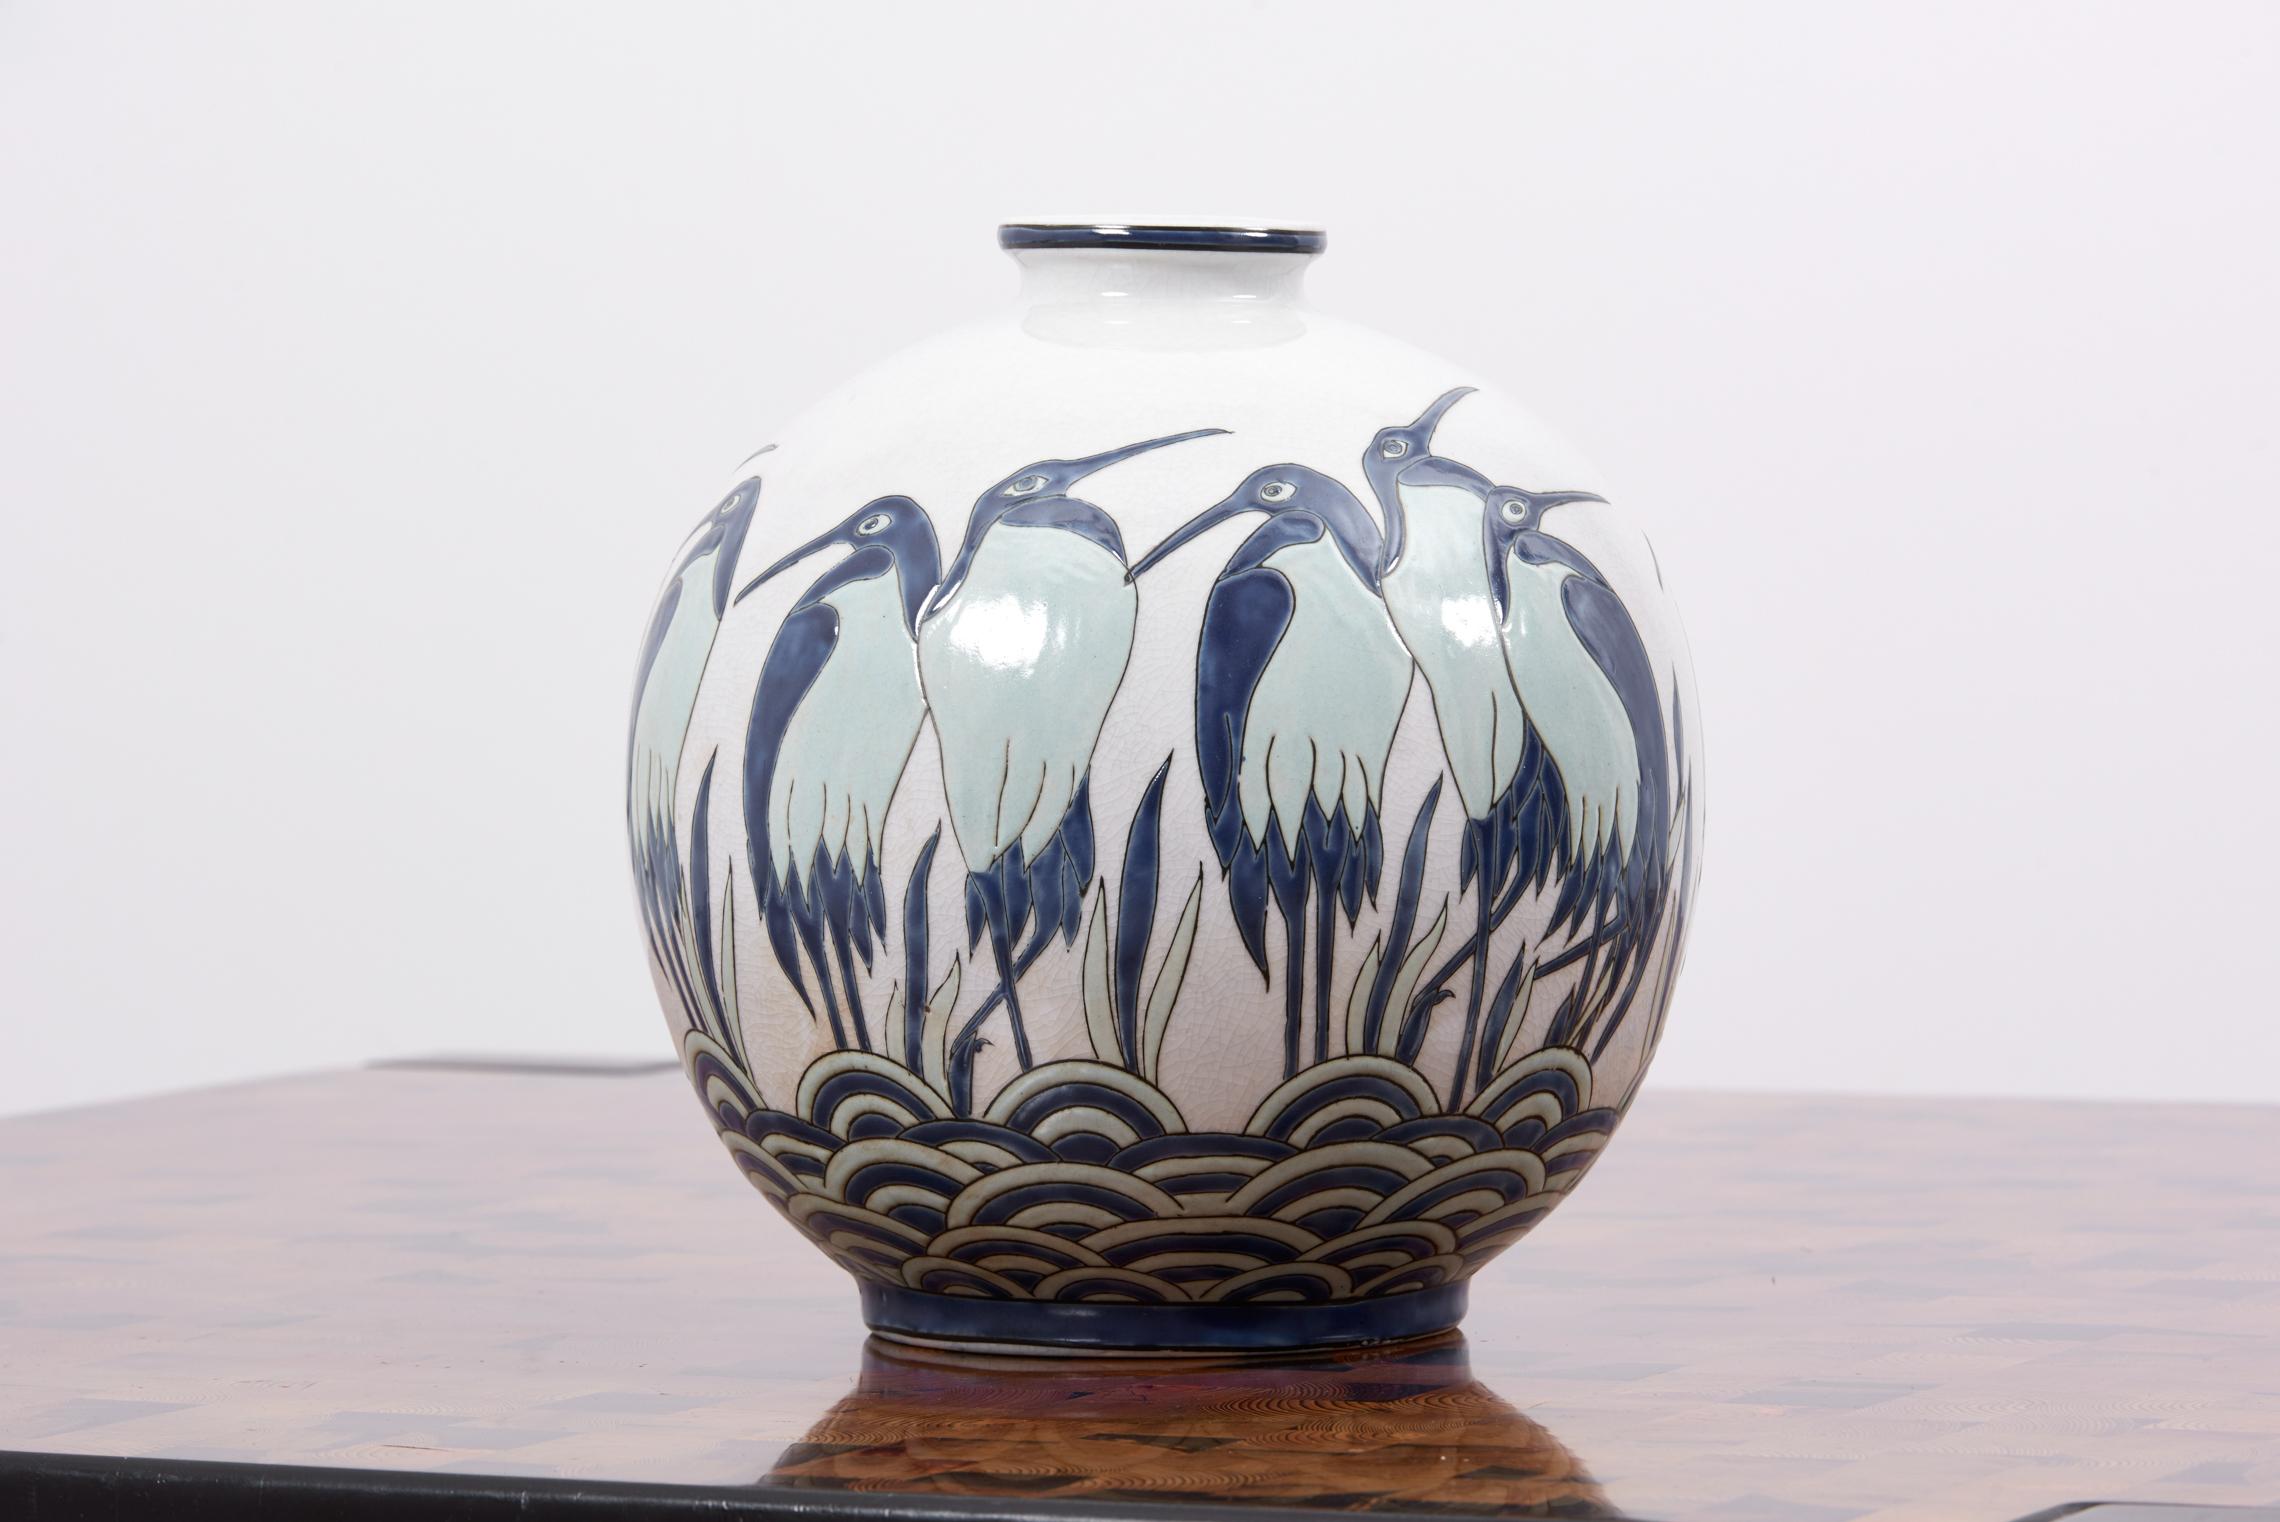 Bulbous vase, model AD003-2 by Keralouve in Belgium (signed), 1970s.
In style of Charles Catteau and Art Deco.